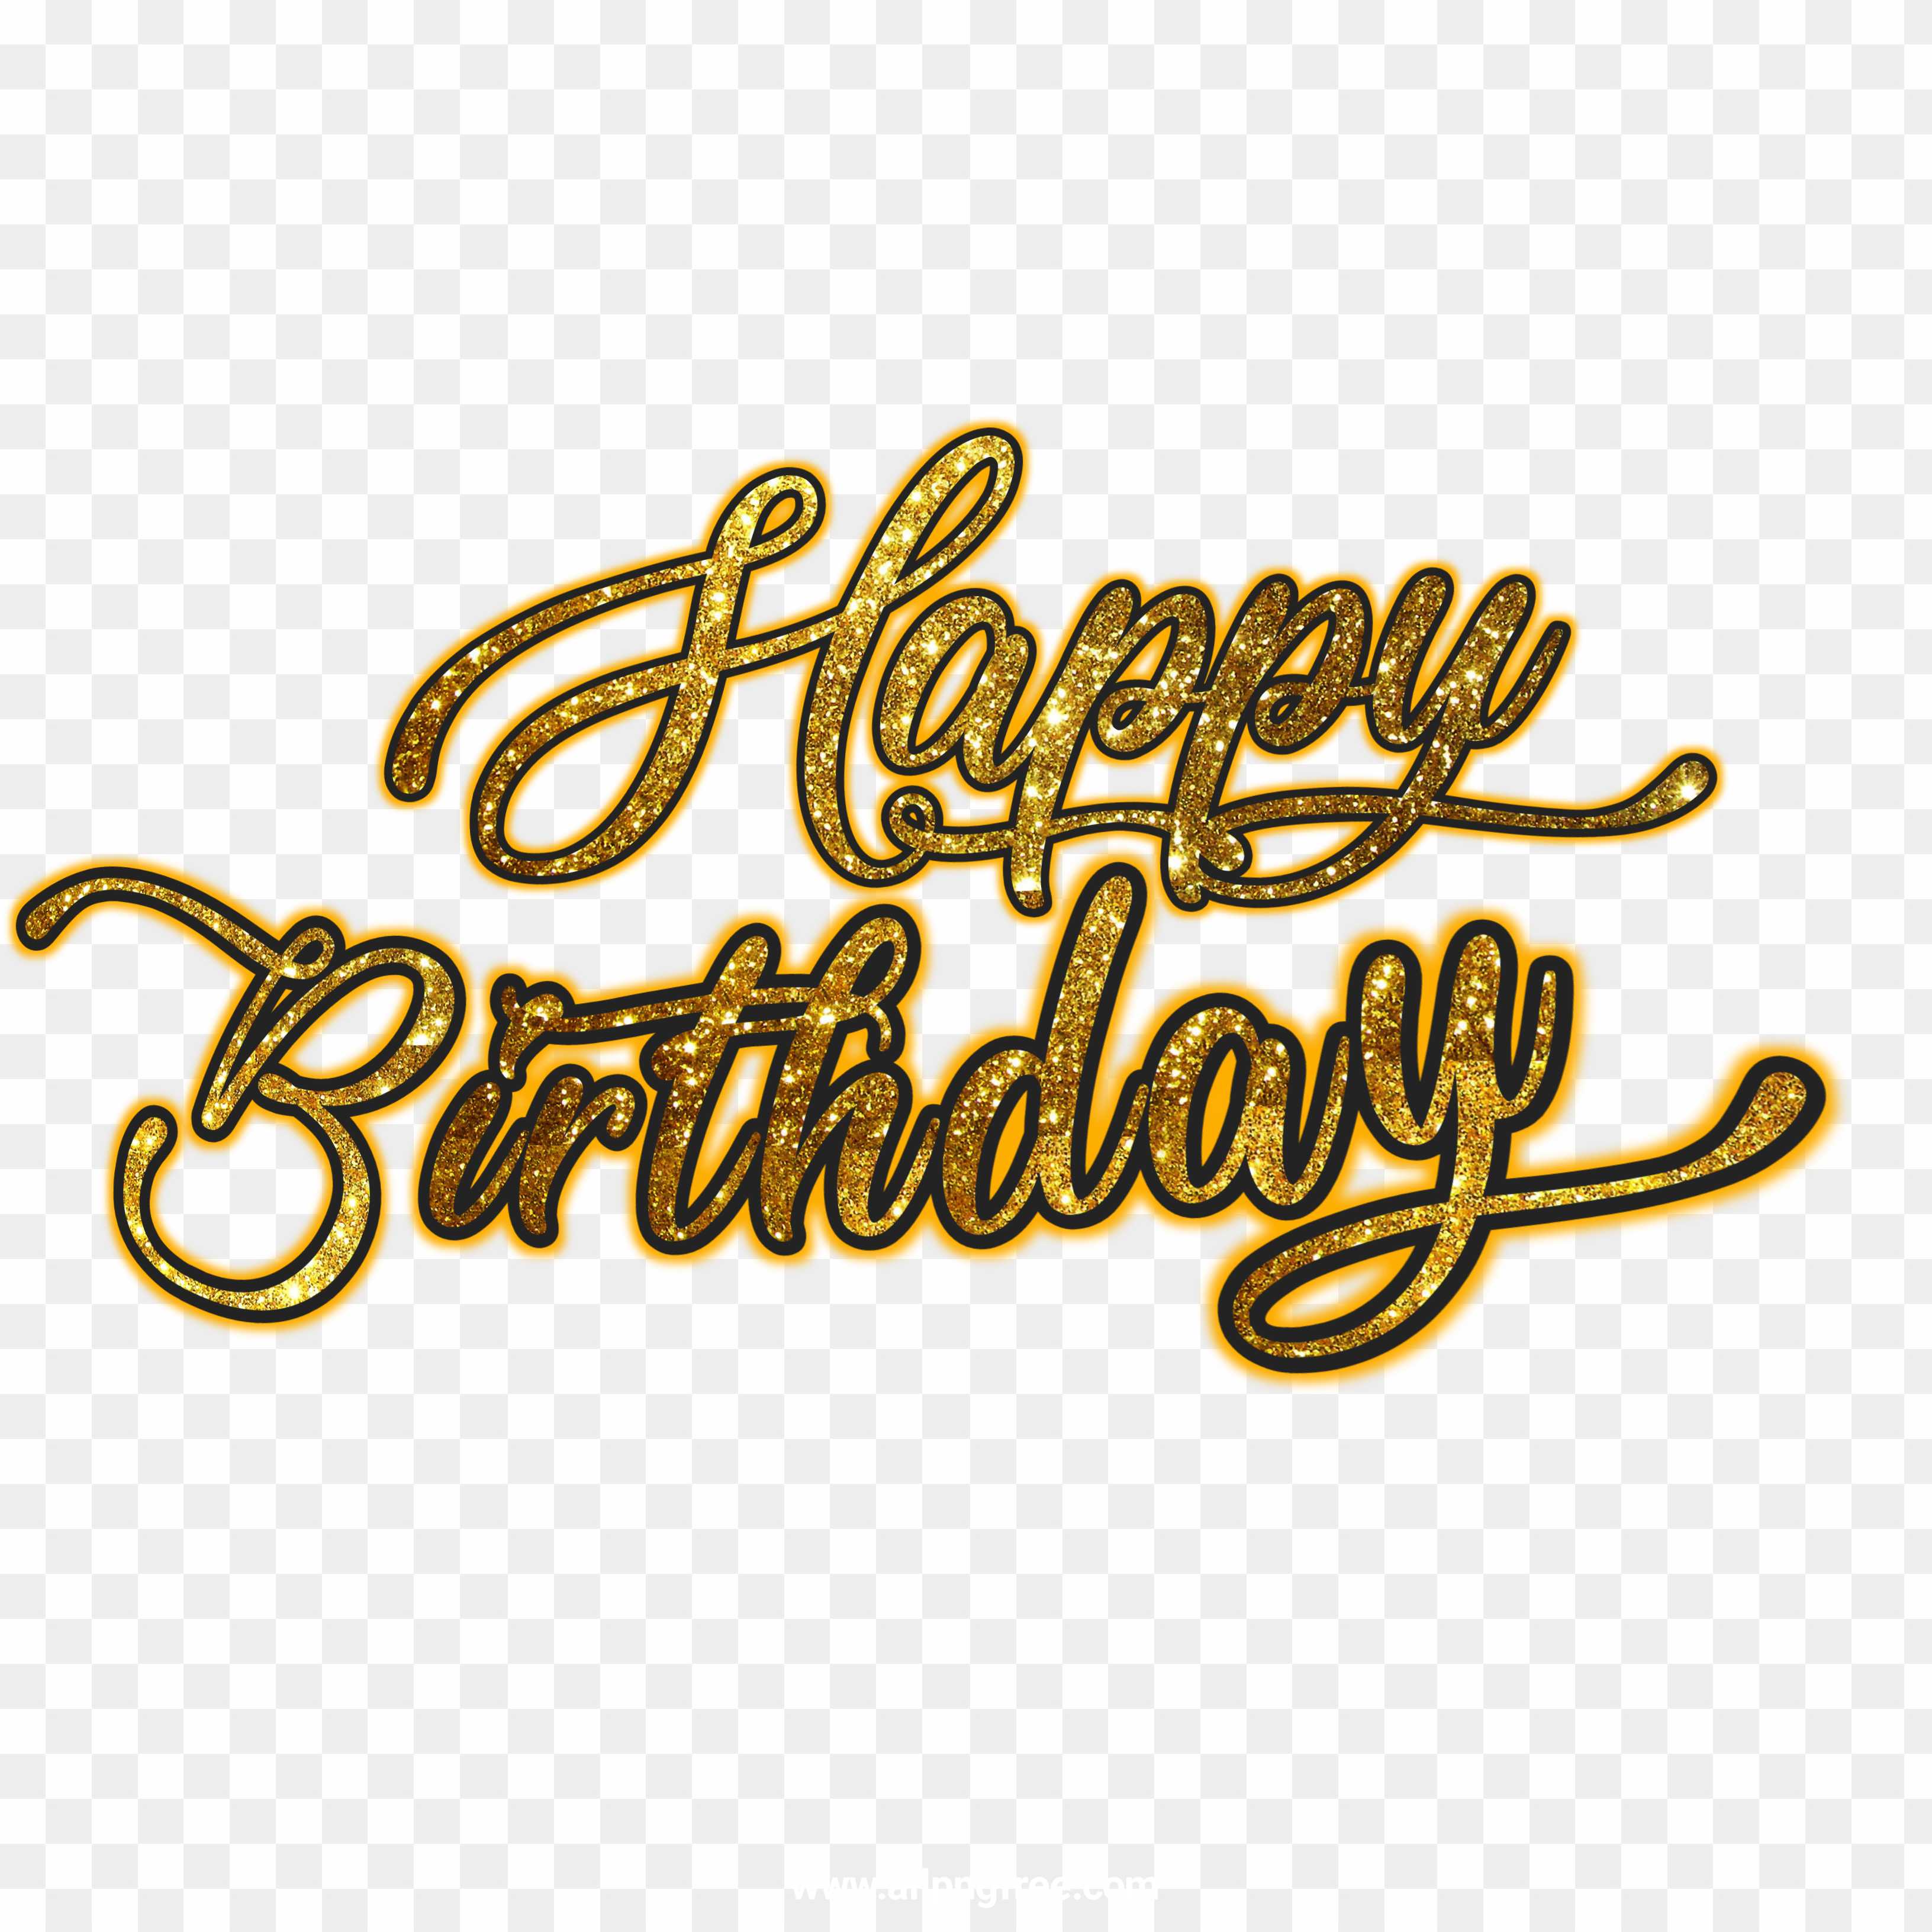 Happy Birthday Golden text PNG images